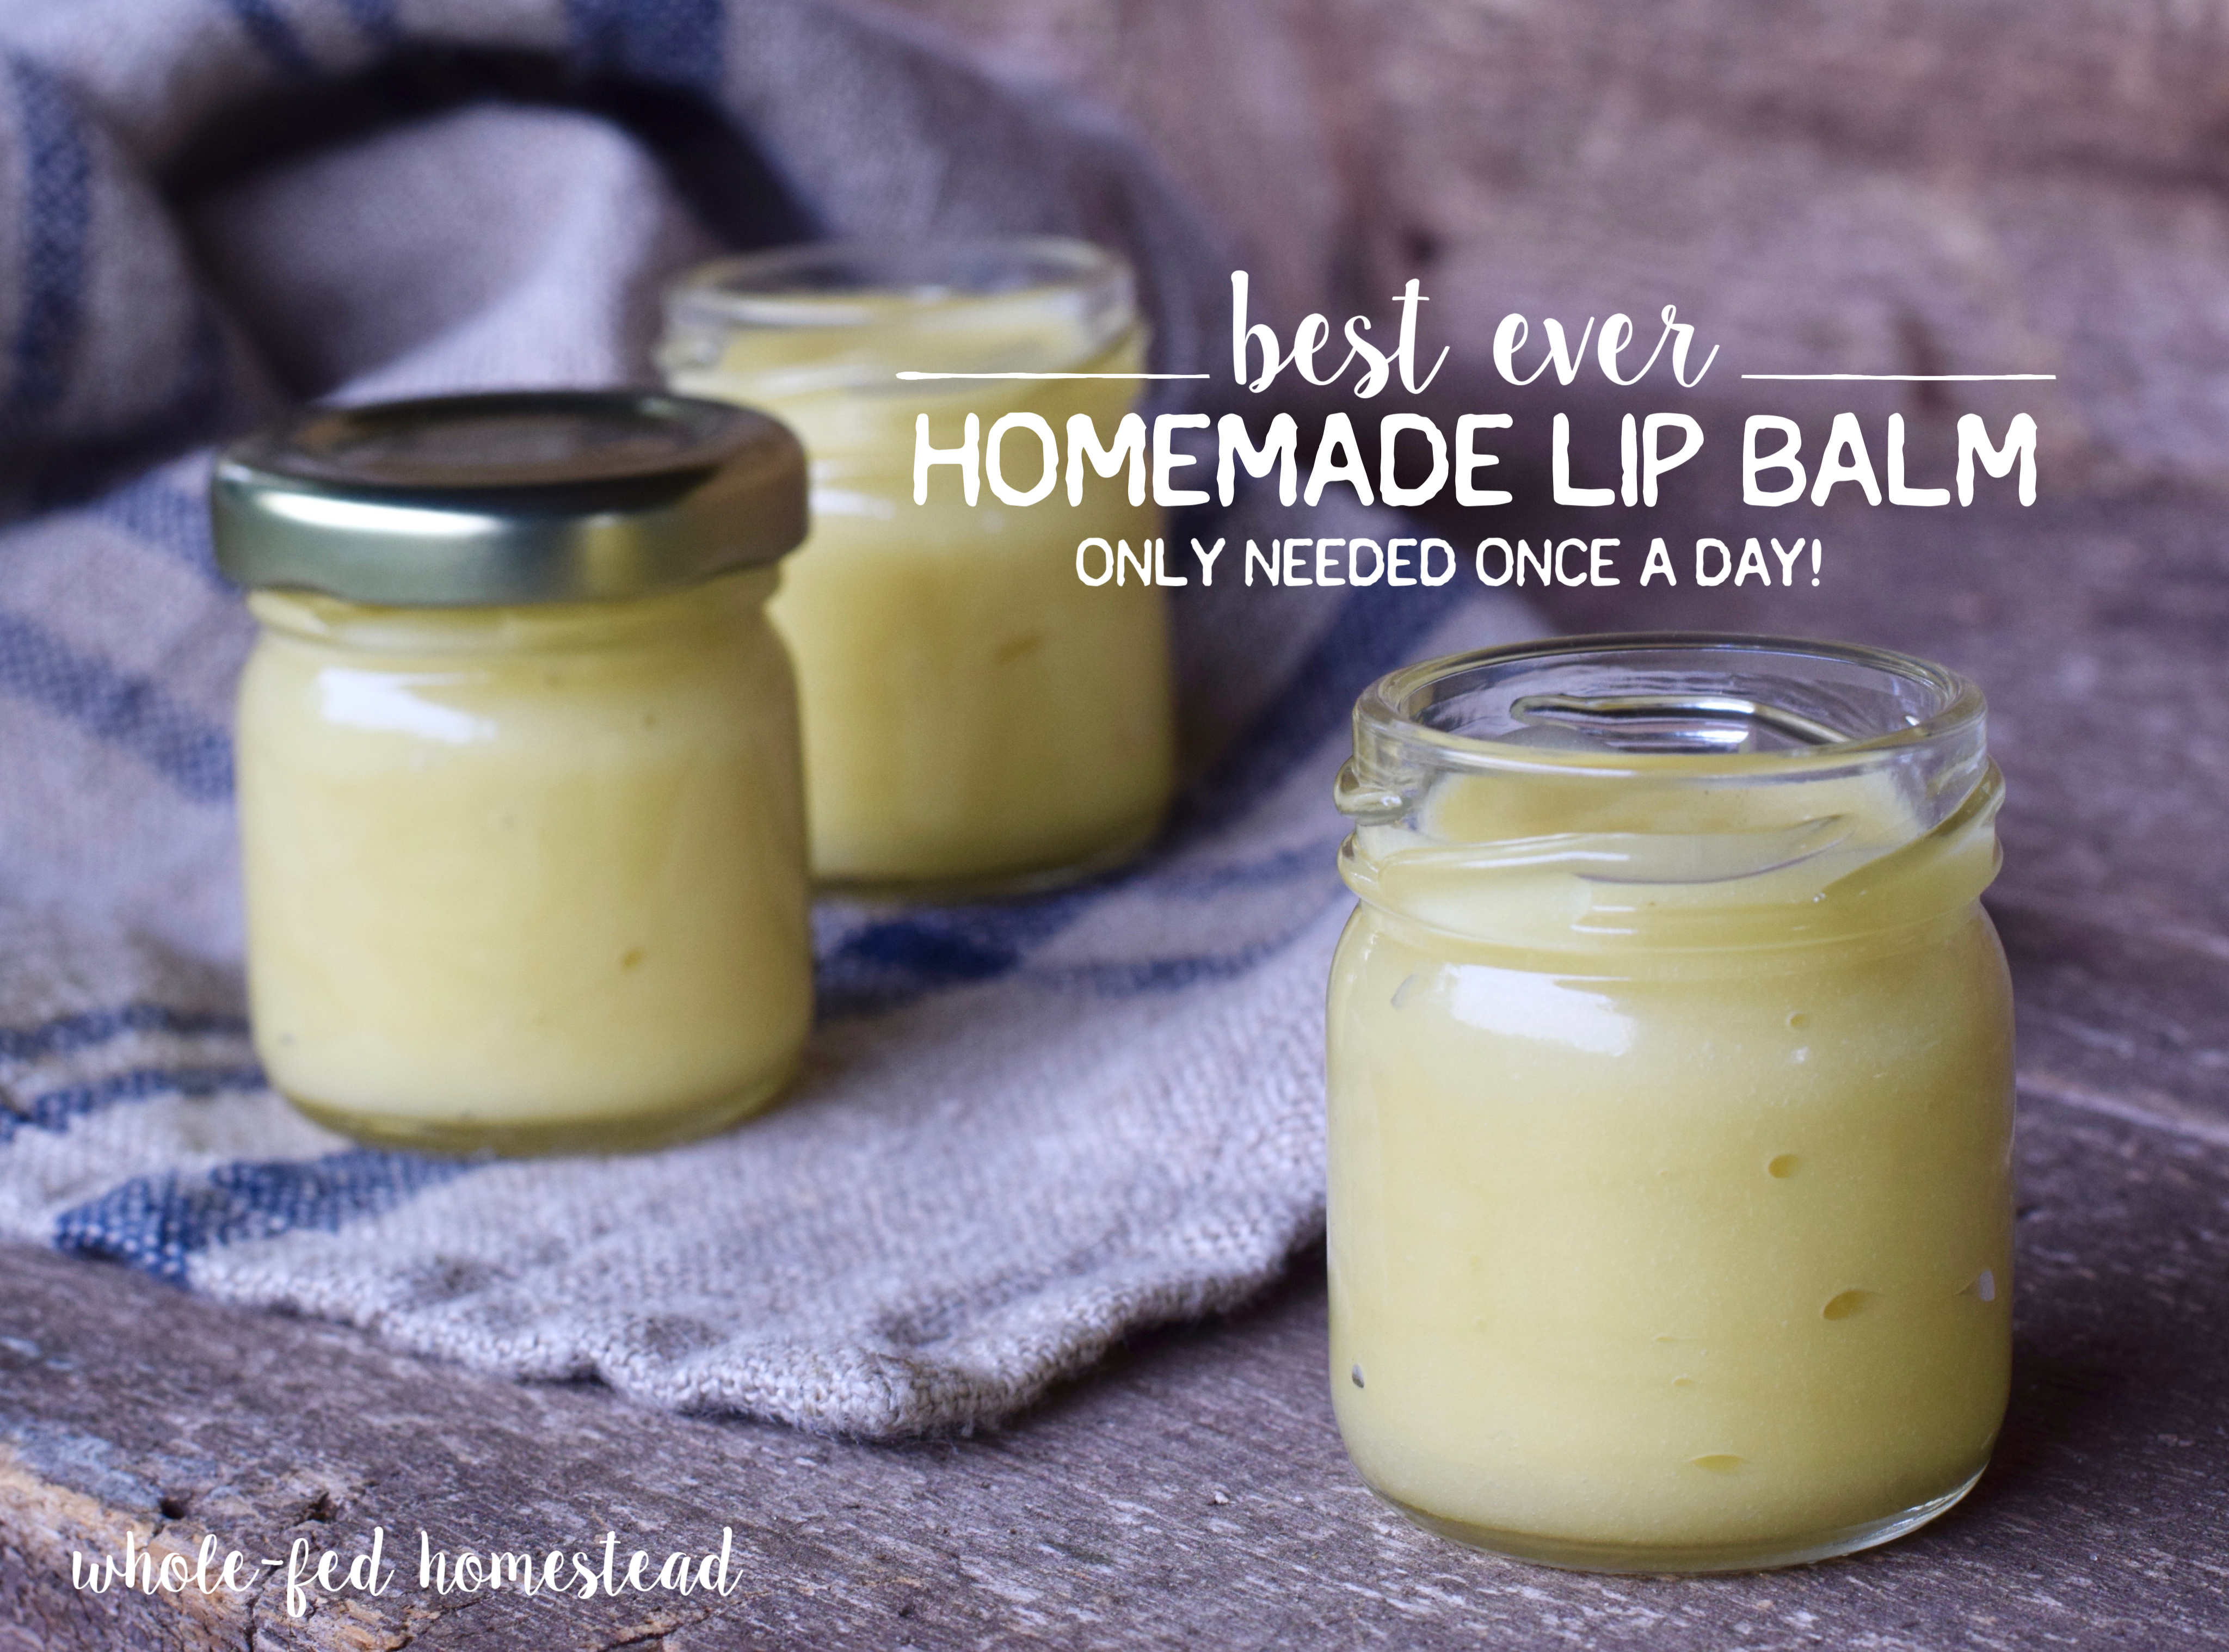 Homemade Honey Lip Balm {As Featured in Mother Earth News Magazine!}